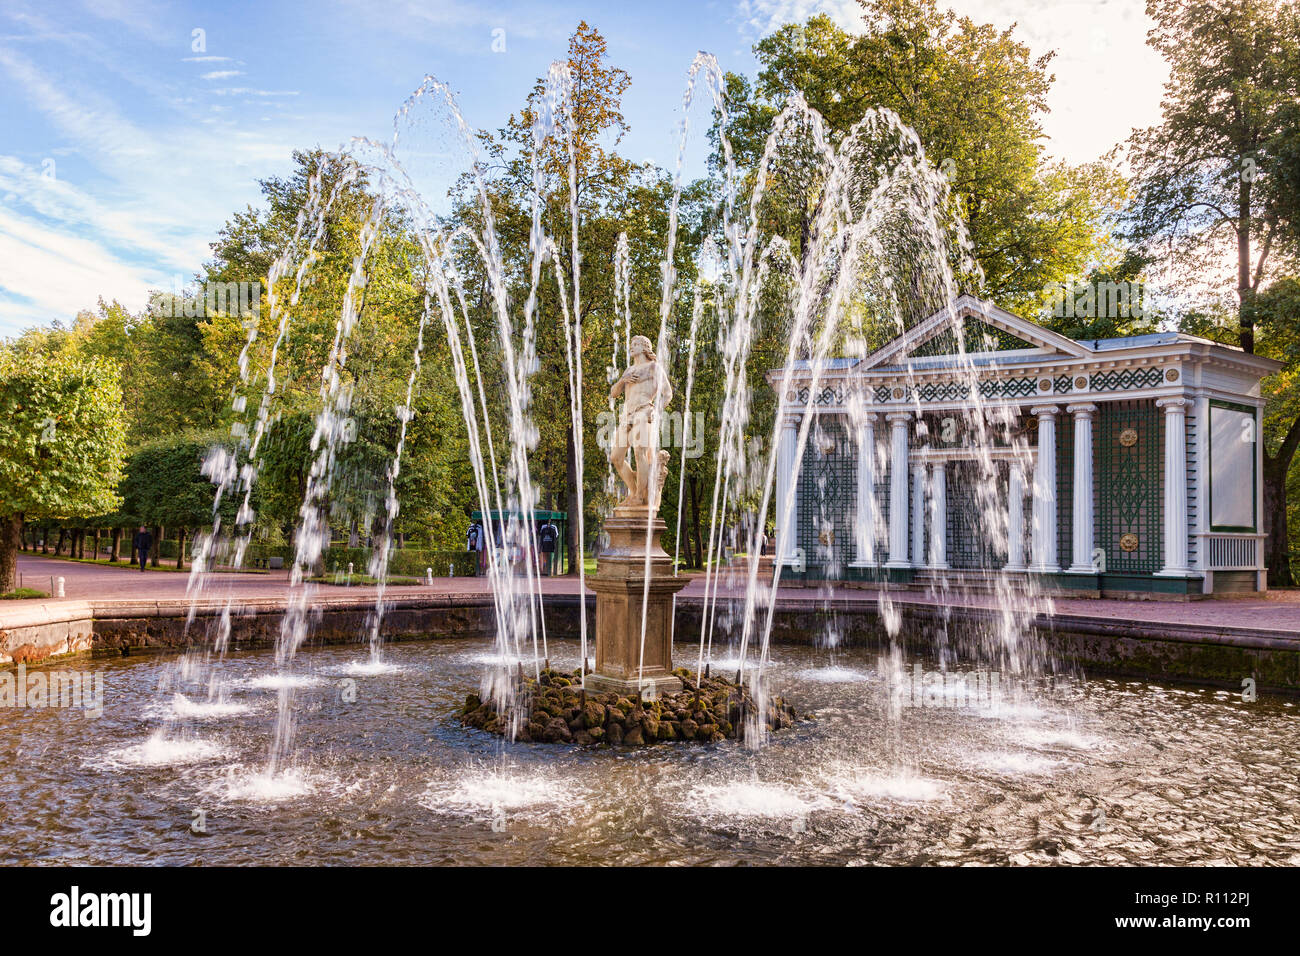 18 September 2018: St Petersburg, Russia - The Adam Fountain,  in Peterhof Palace Fountain Gardens. There is also a similar Eve fountain. Stock Photo